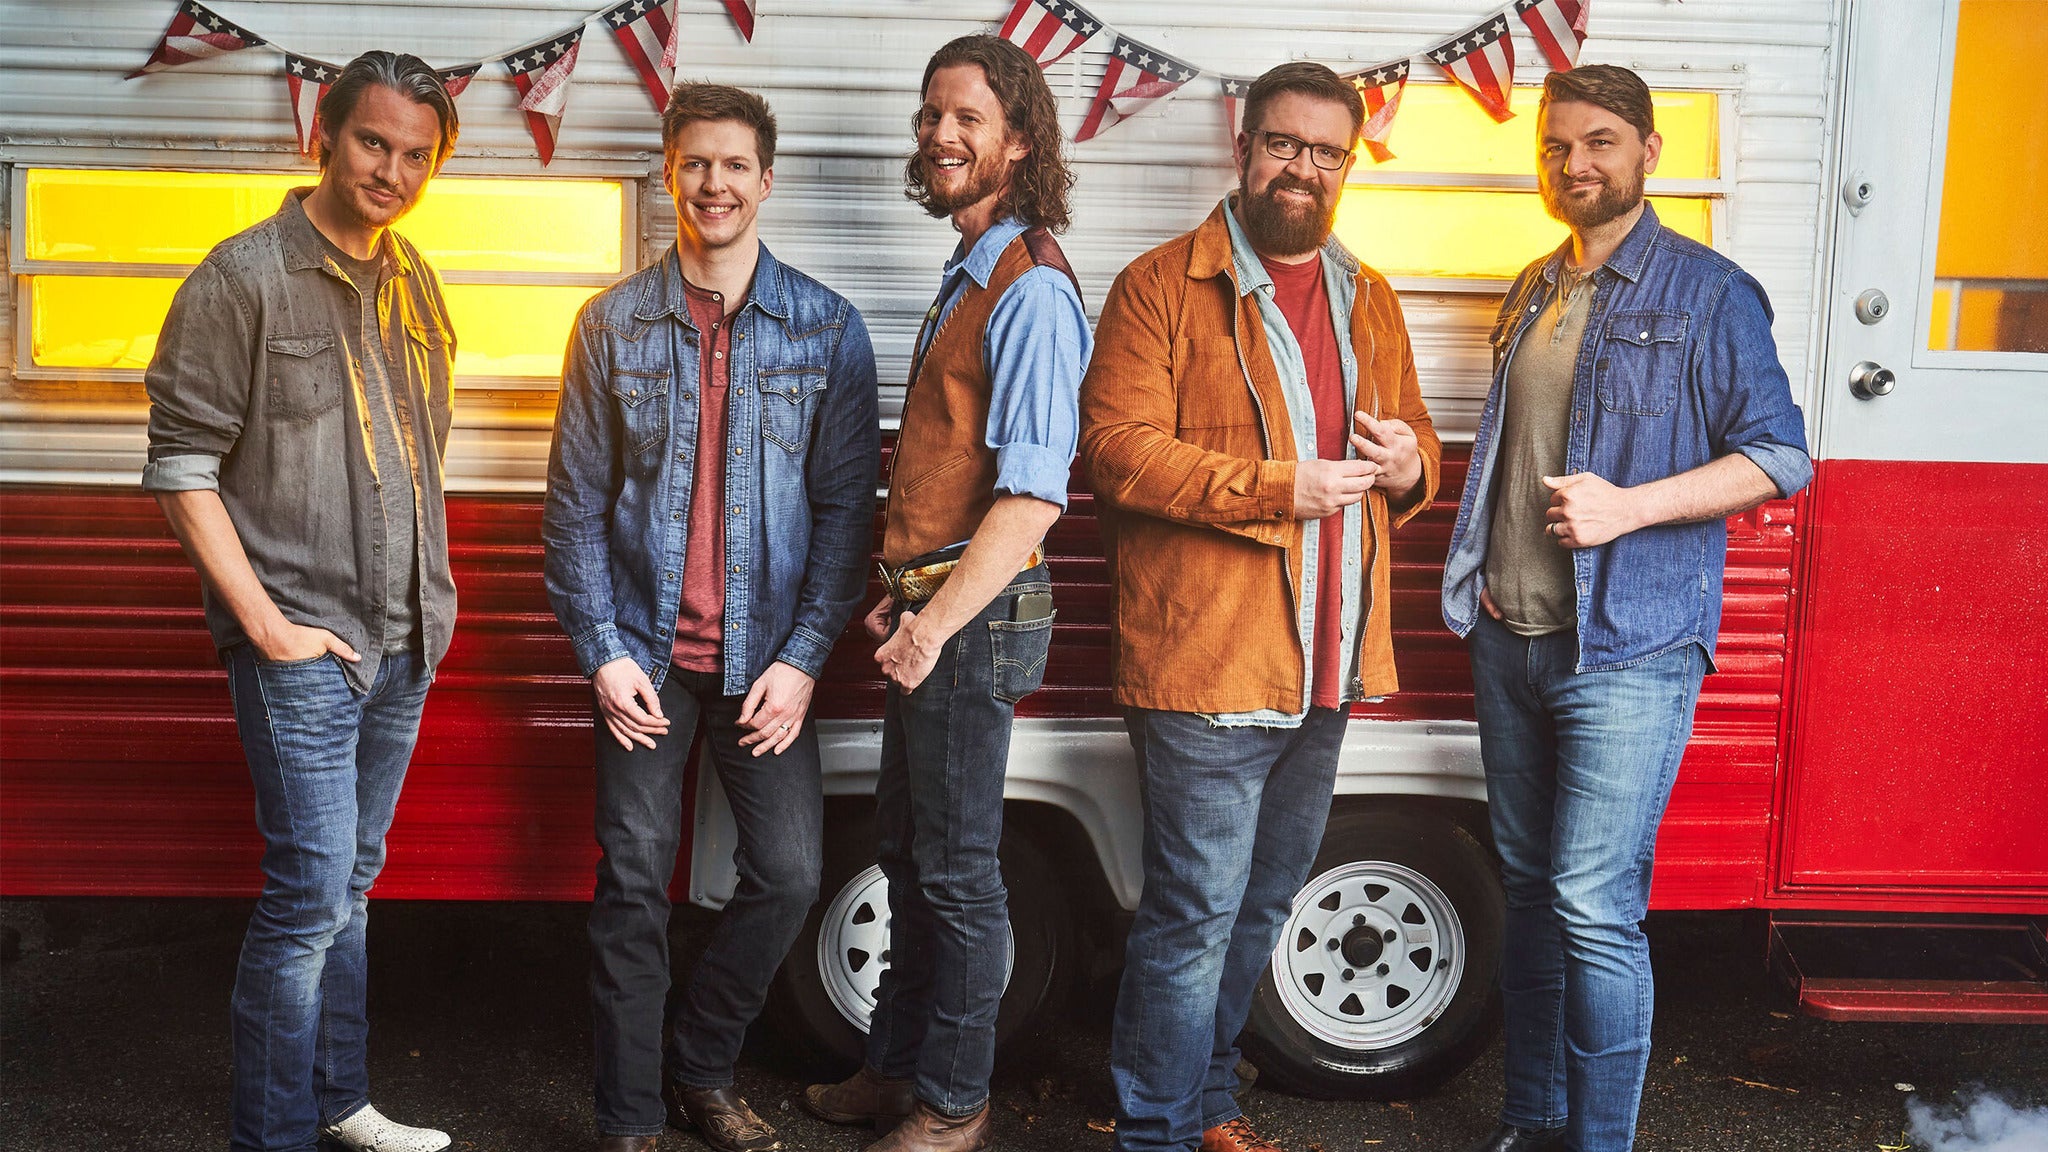 Home Free: Road Sweet Road Tour presale code for early tickets in Anaheim